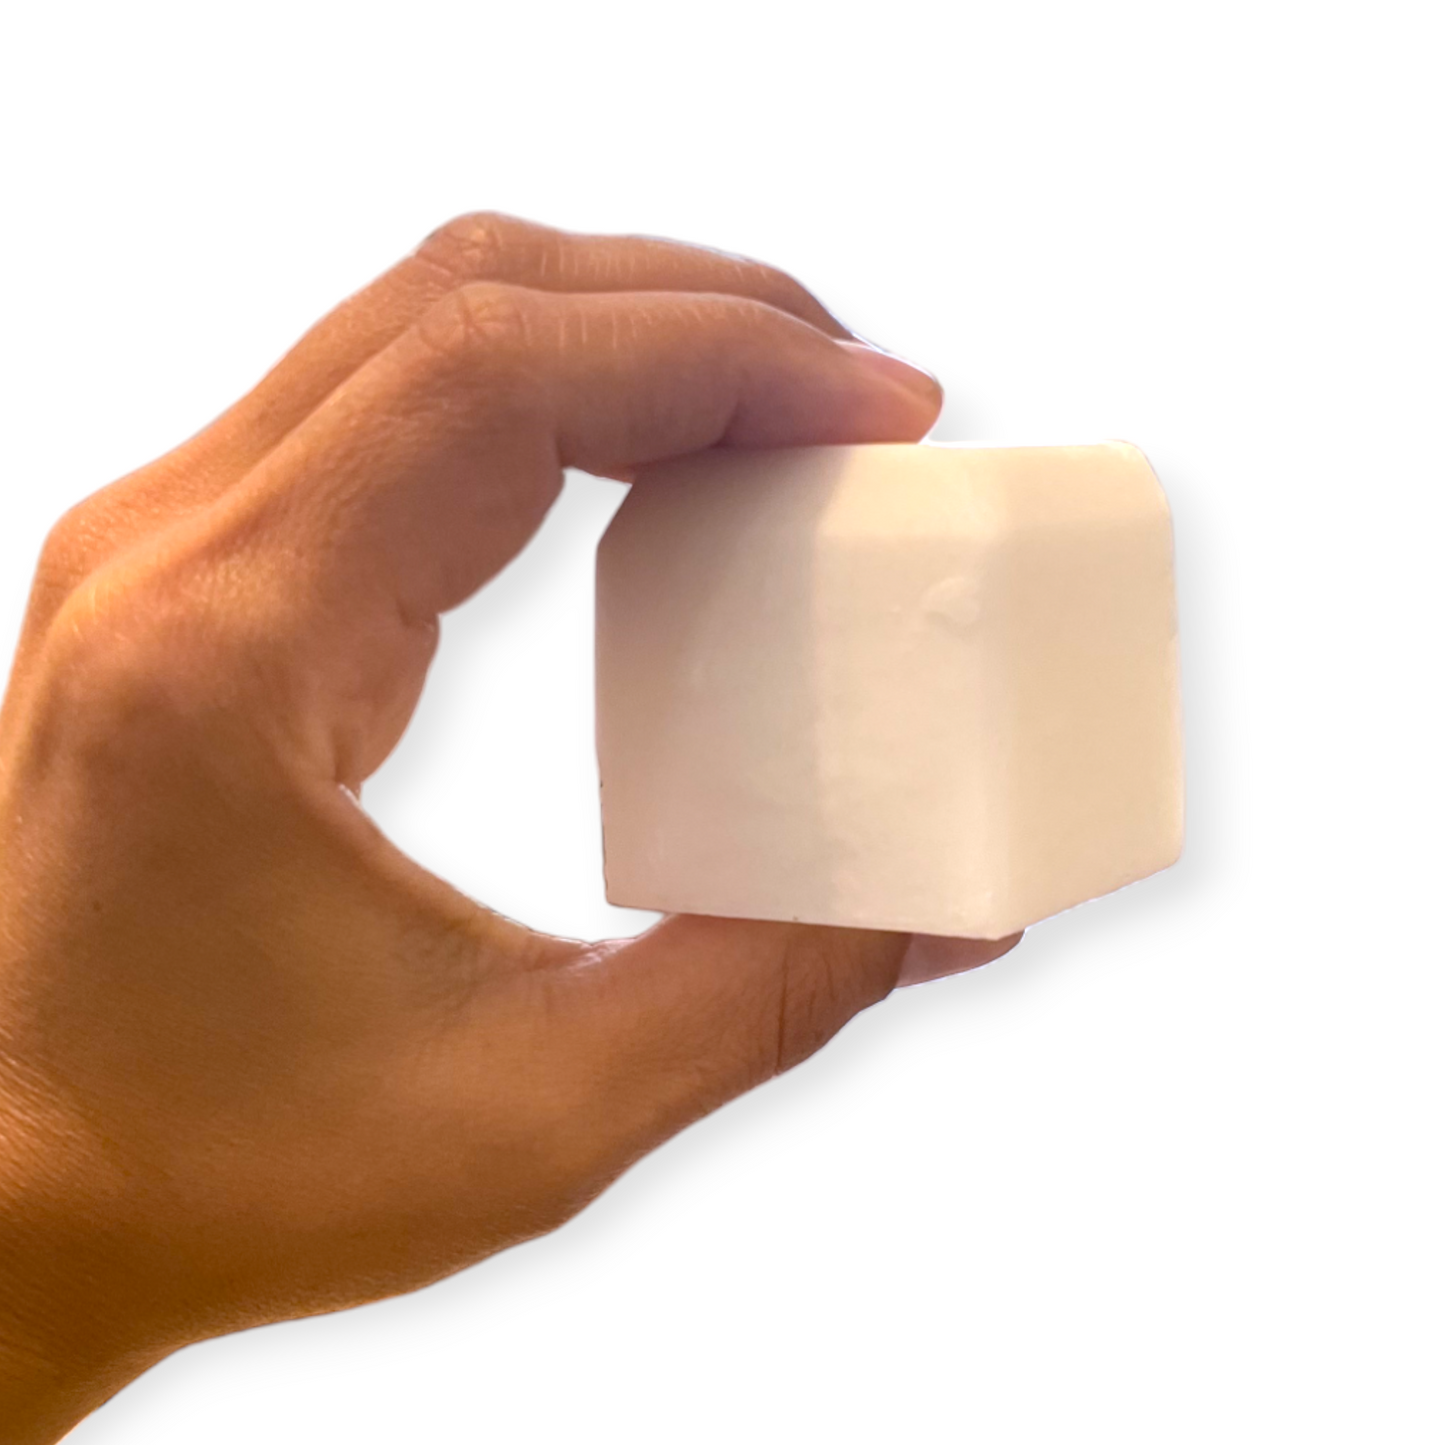 Deodorant Cube by No Tox Life